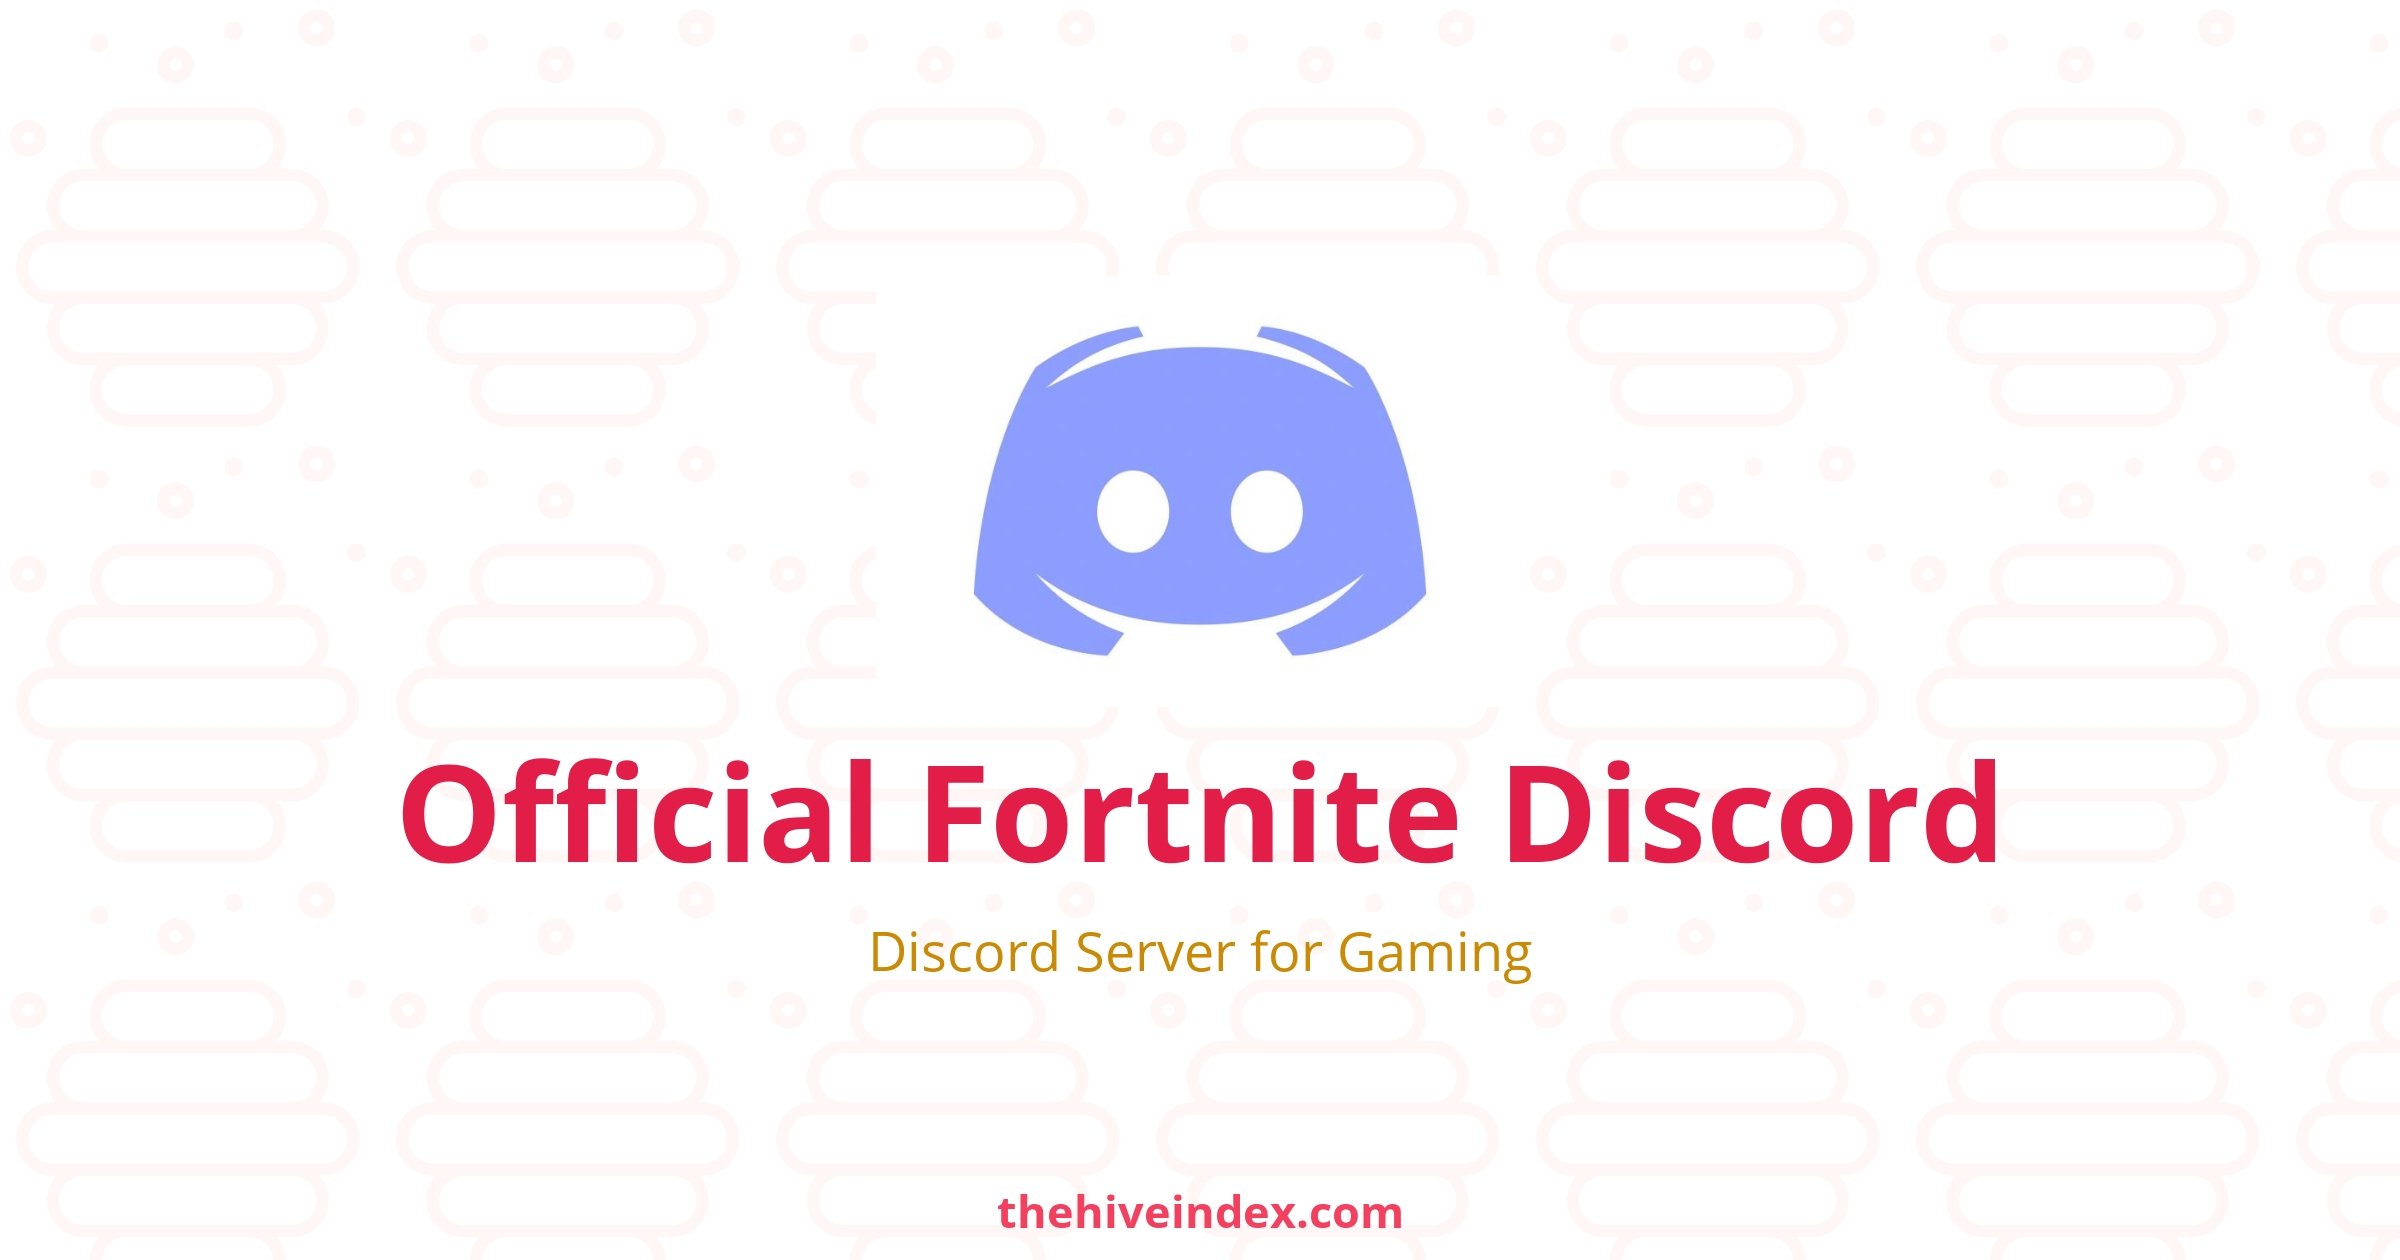 Official Fortnite Discord - Discord Server for Gaming